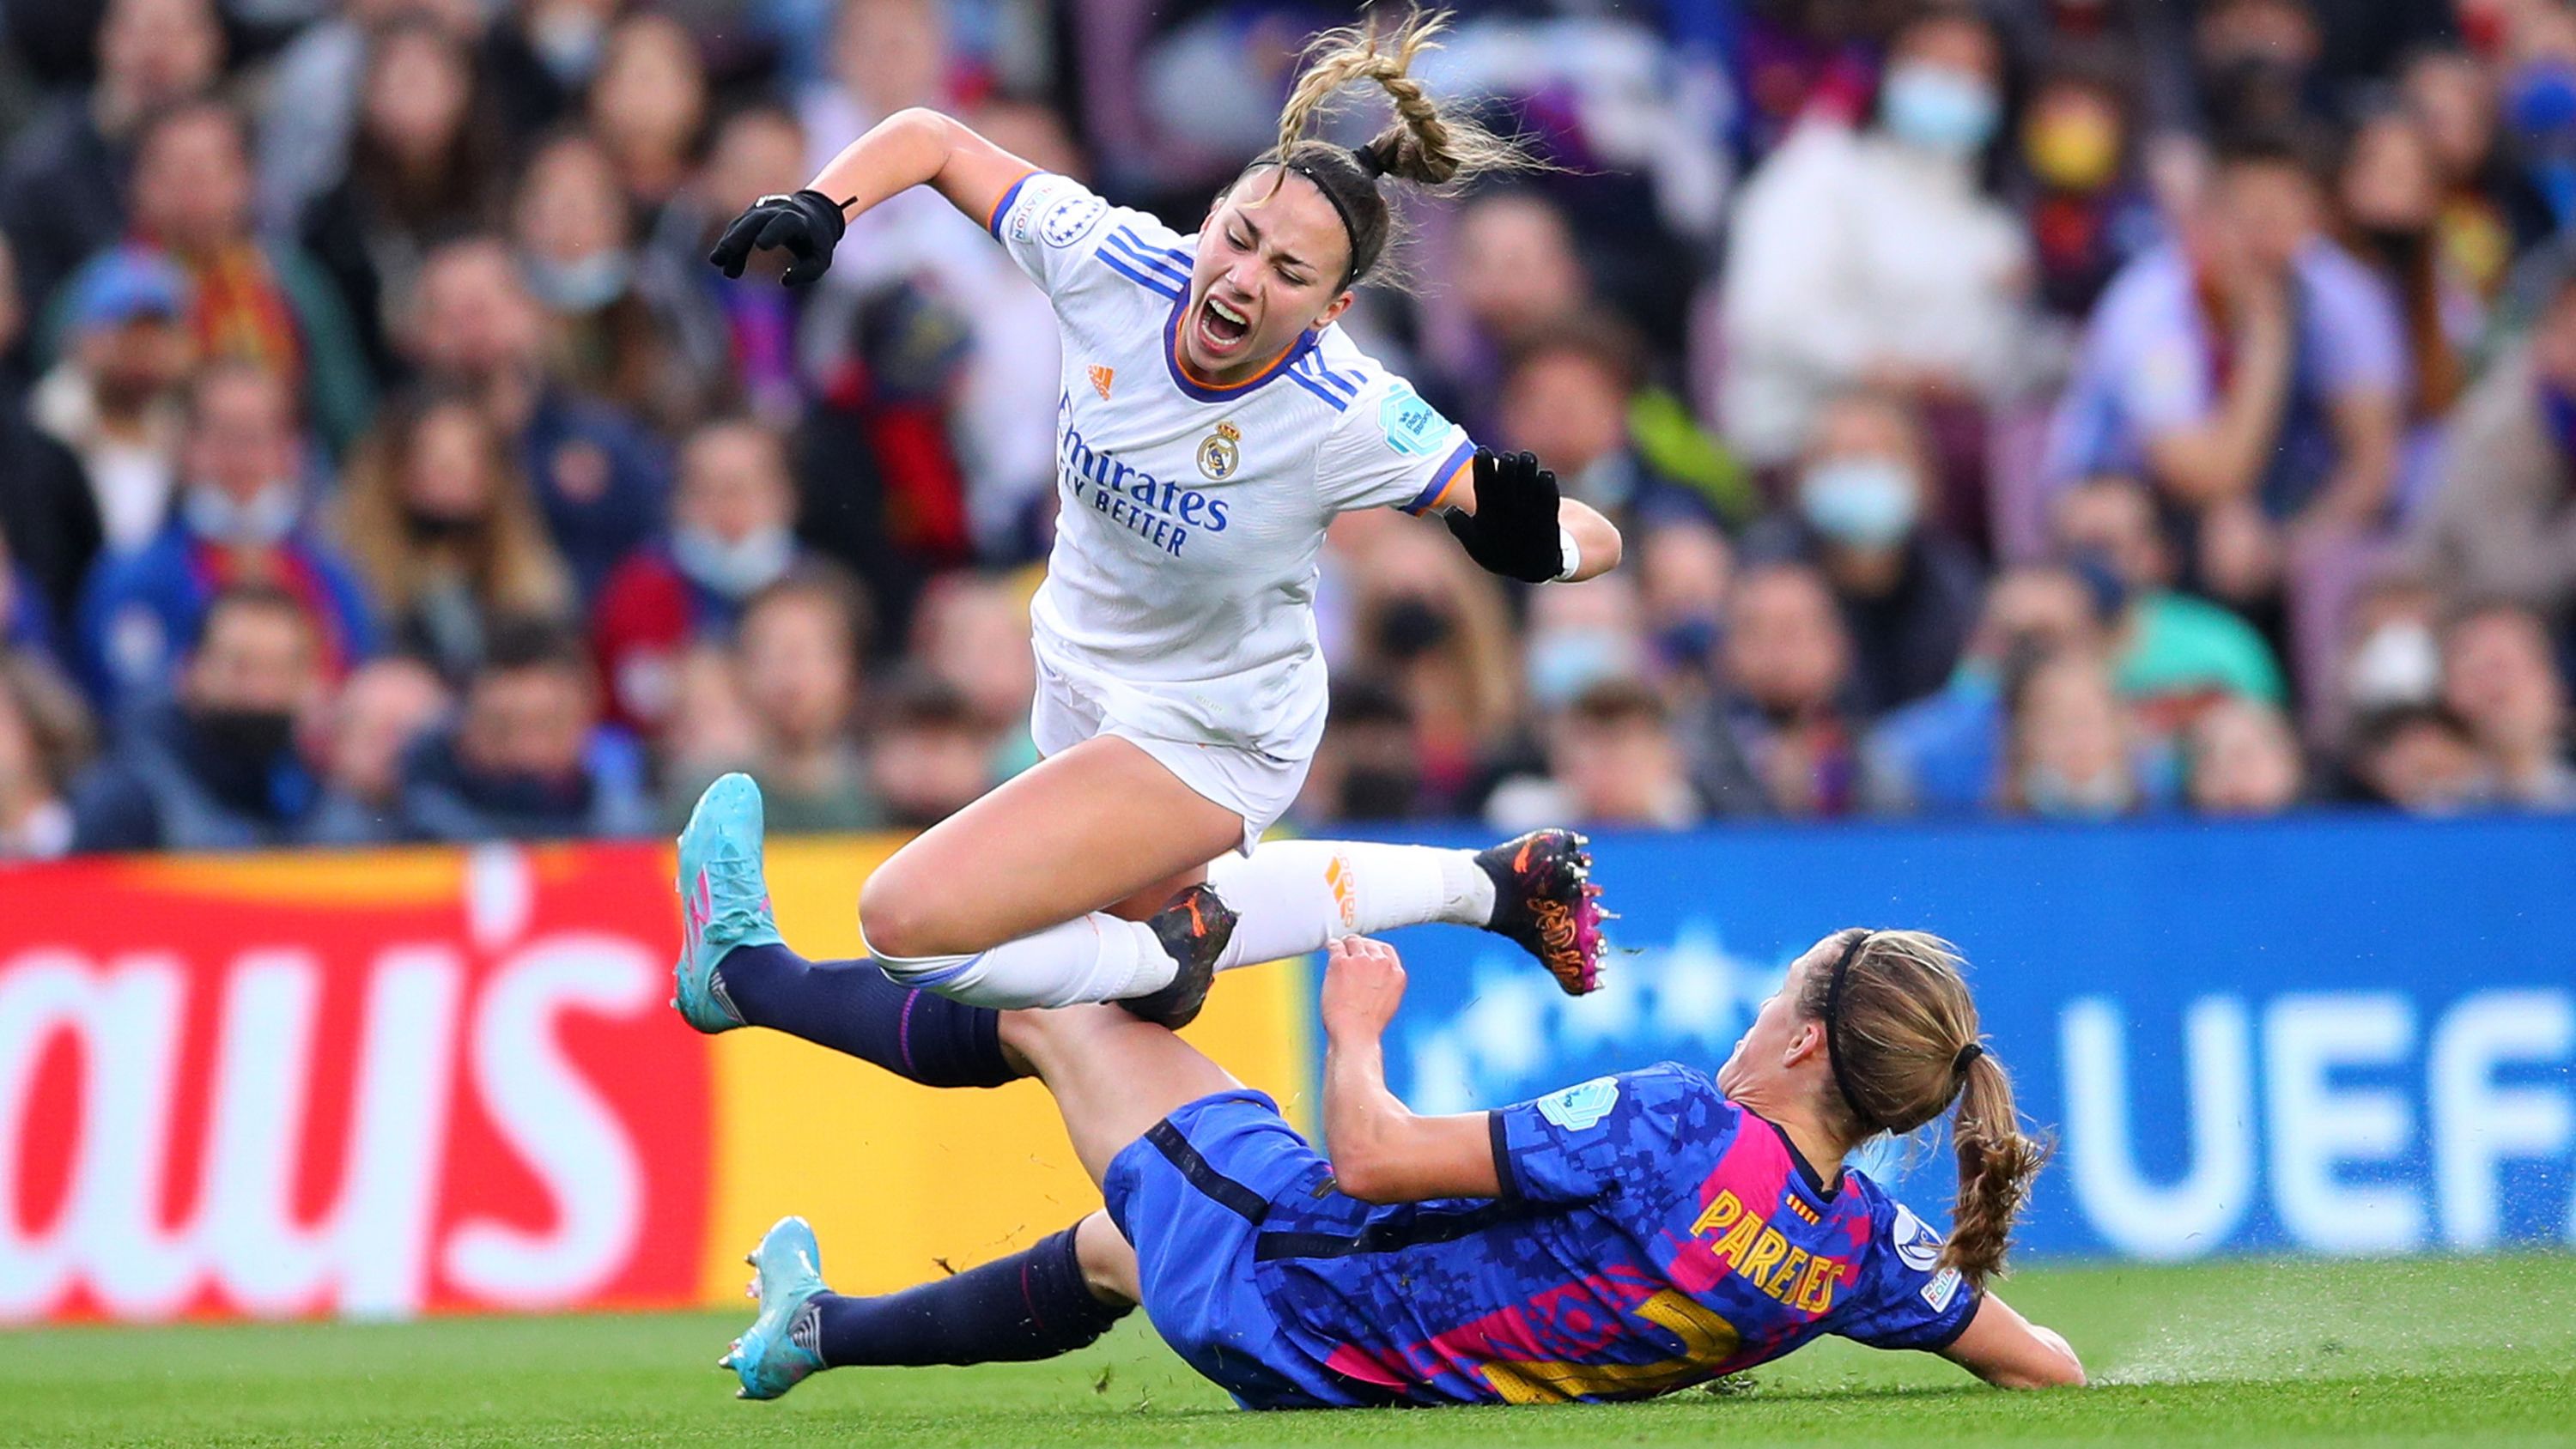 Record attendance: 91,553 watch women's football game in Barcelona